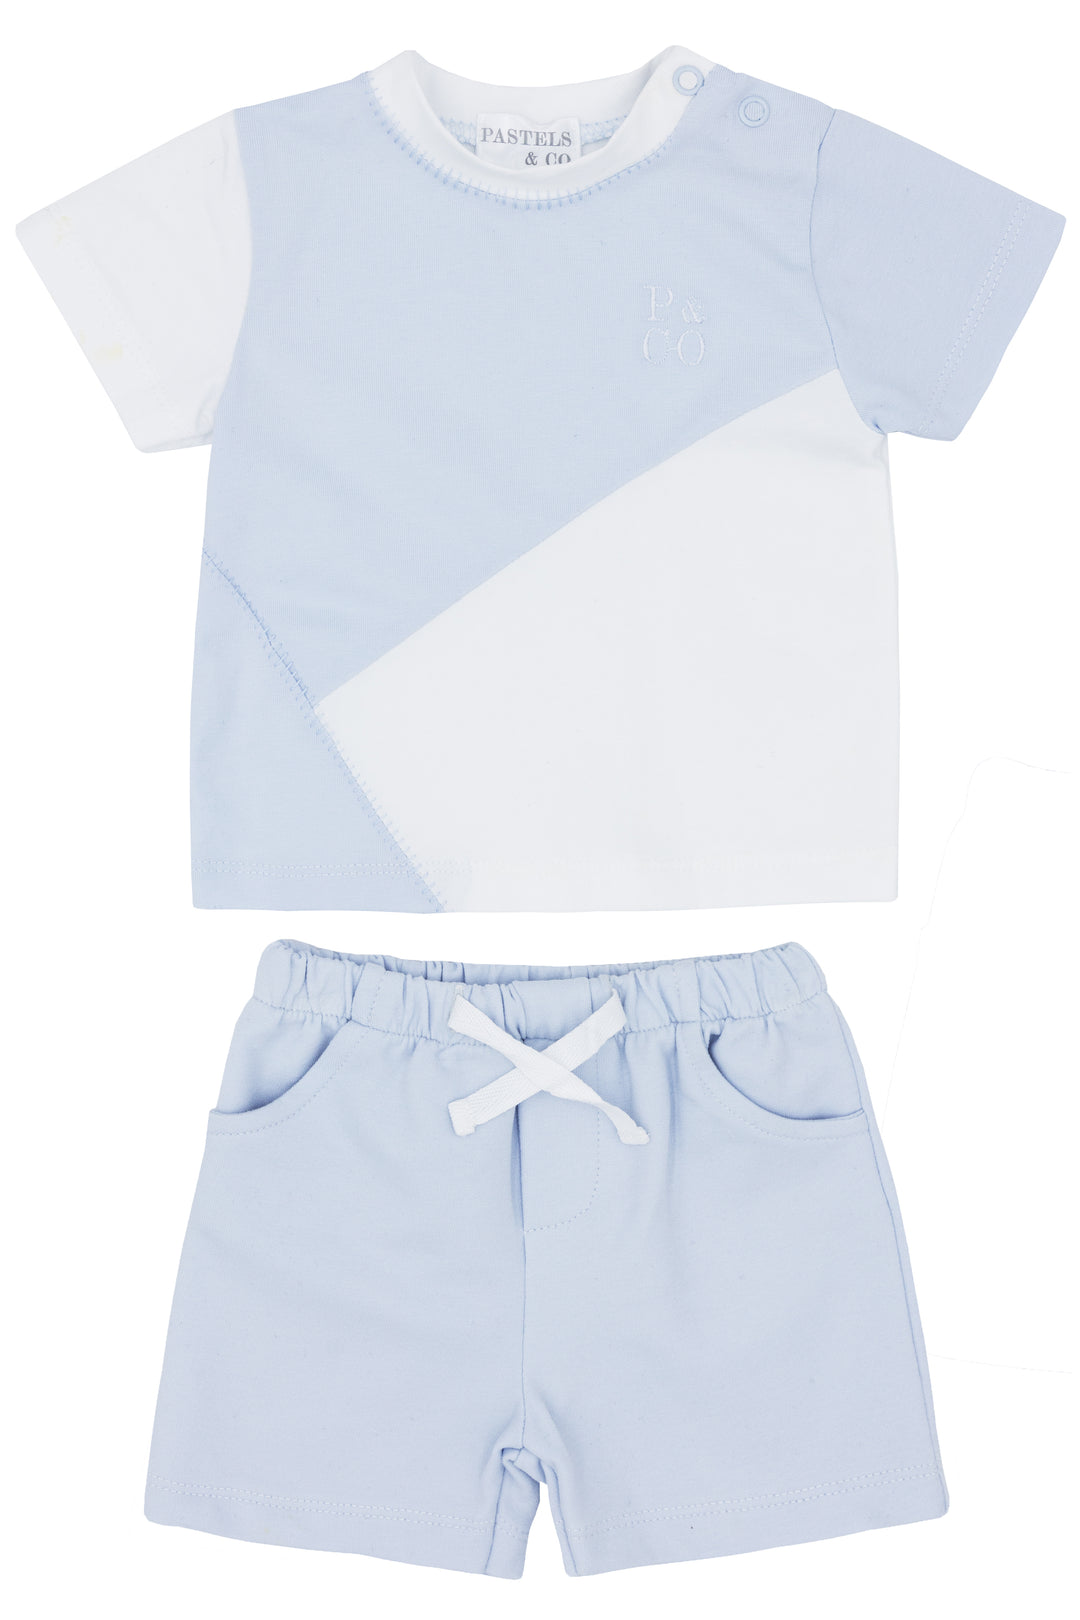 Pastels & Co "Clem" Baby Blue T-Shirt & Shorts | Millie and John